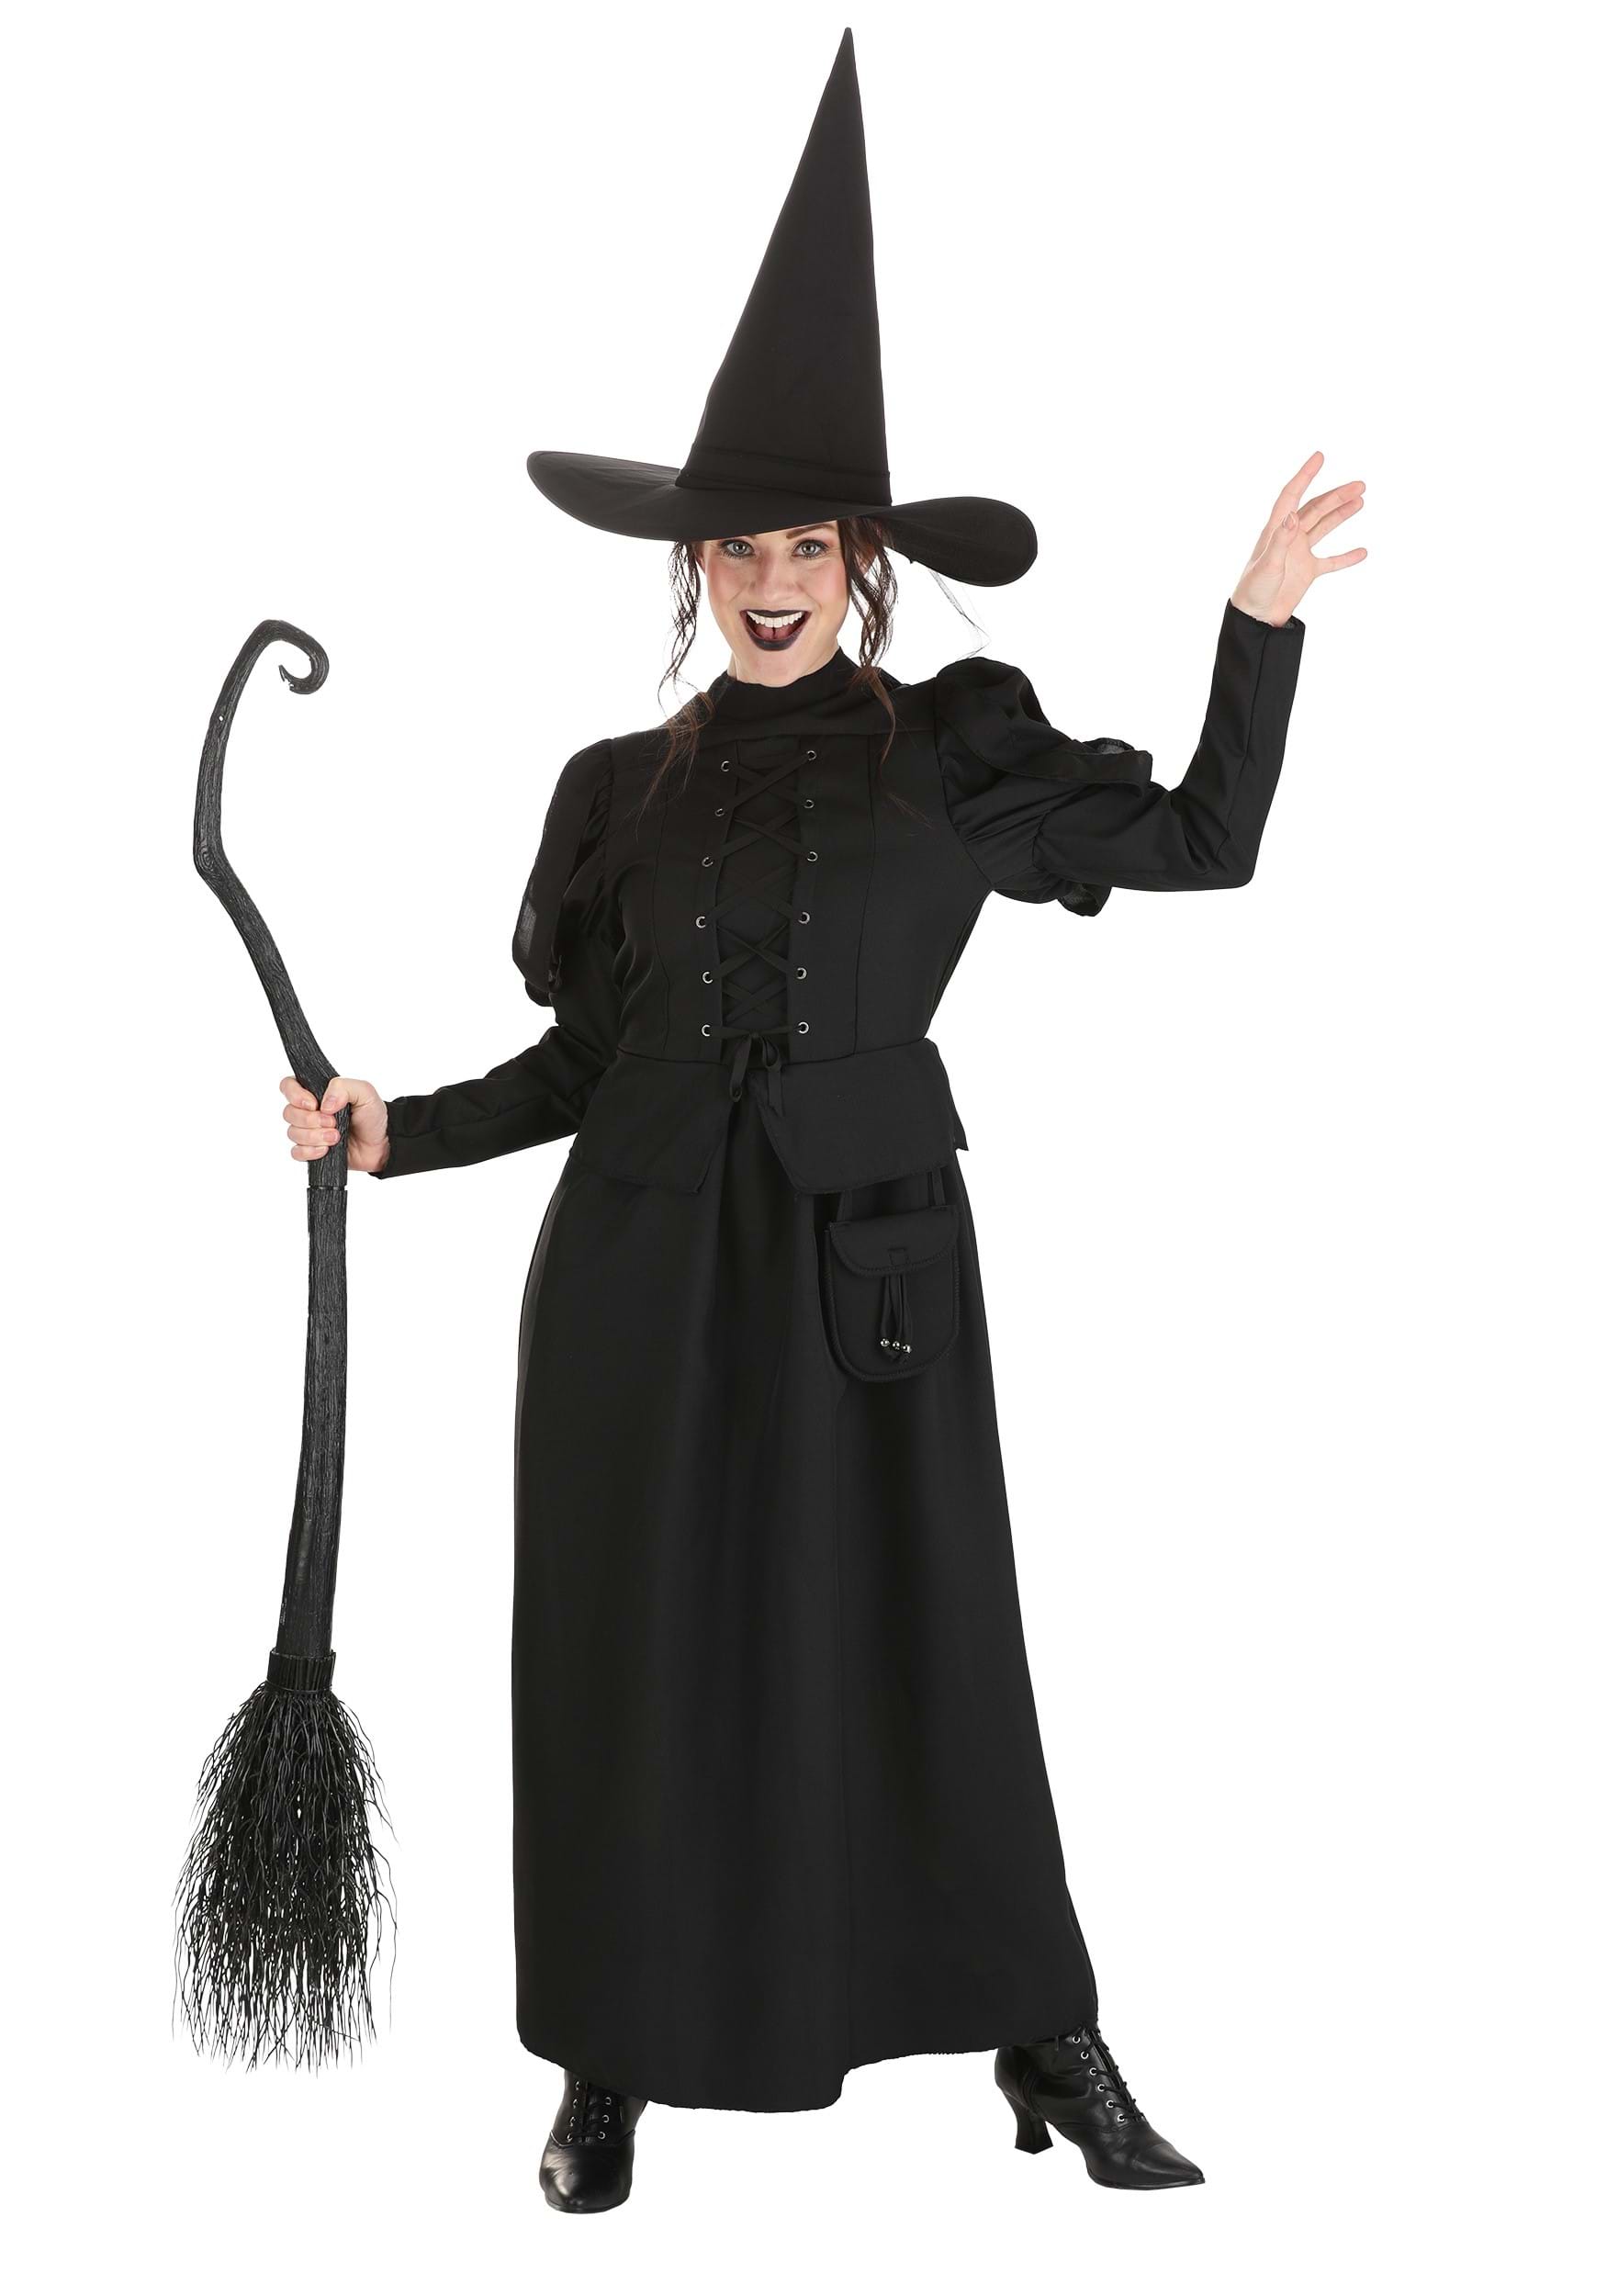 Image of Wizard of Oz Wicked Witch Costume for Women ID JLJLF1040AD-S